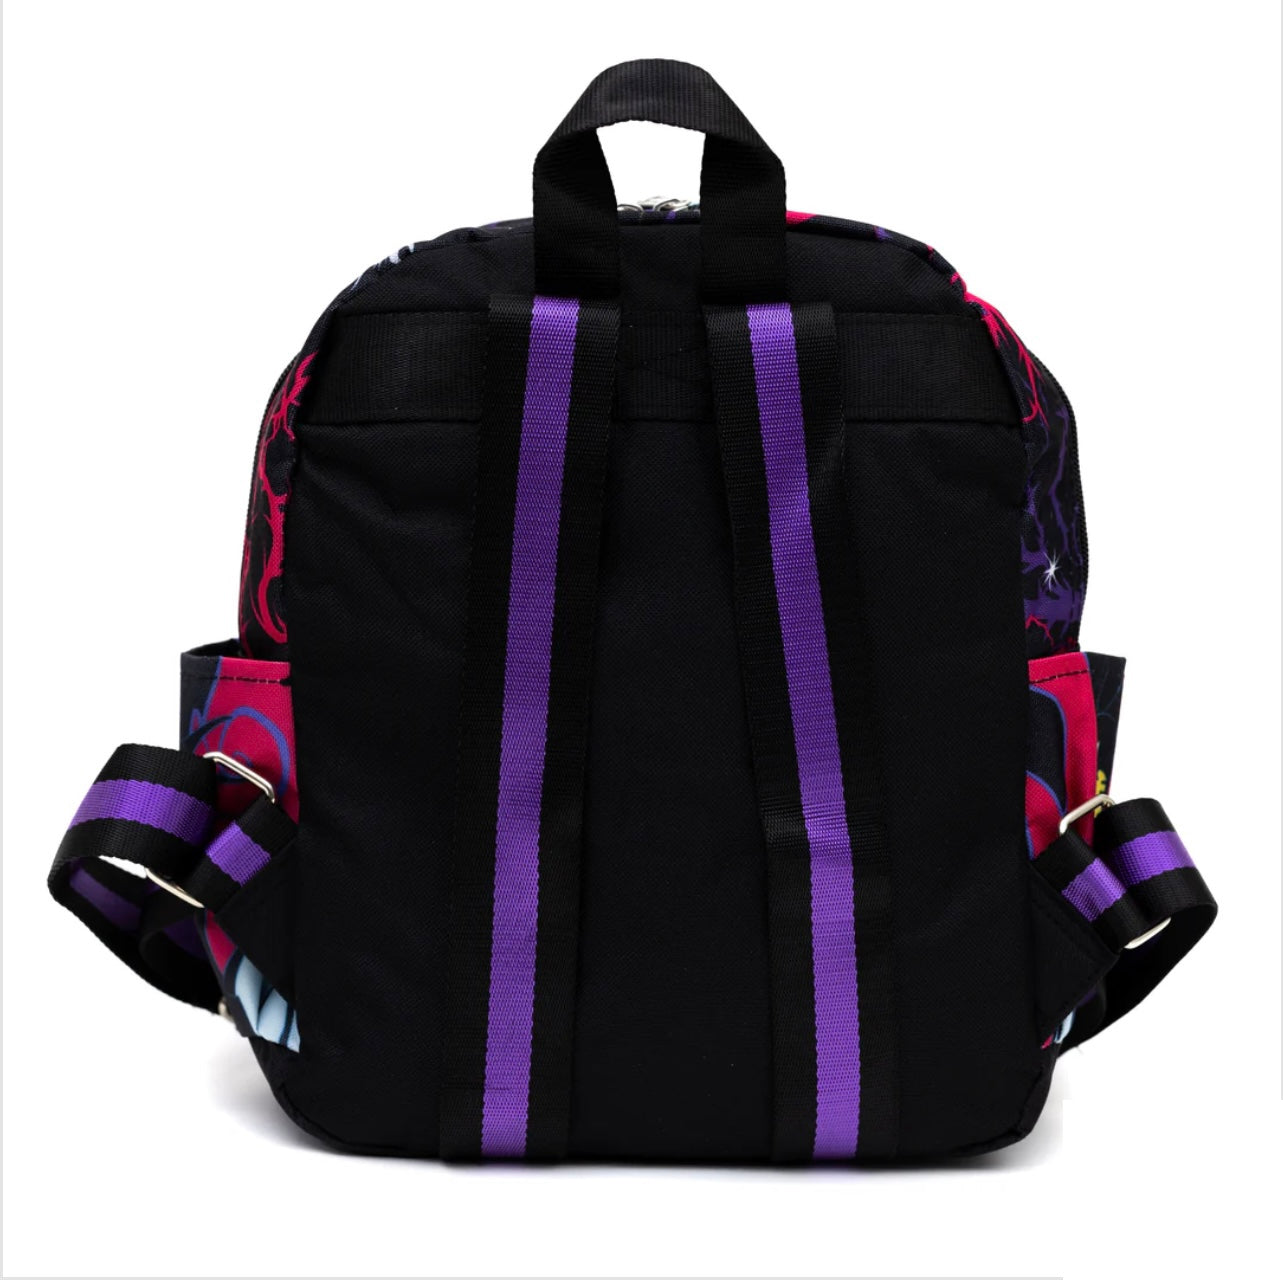 Maleficent Fabric Backpack